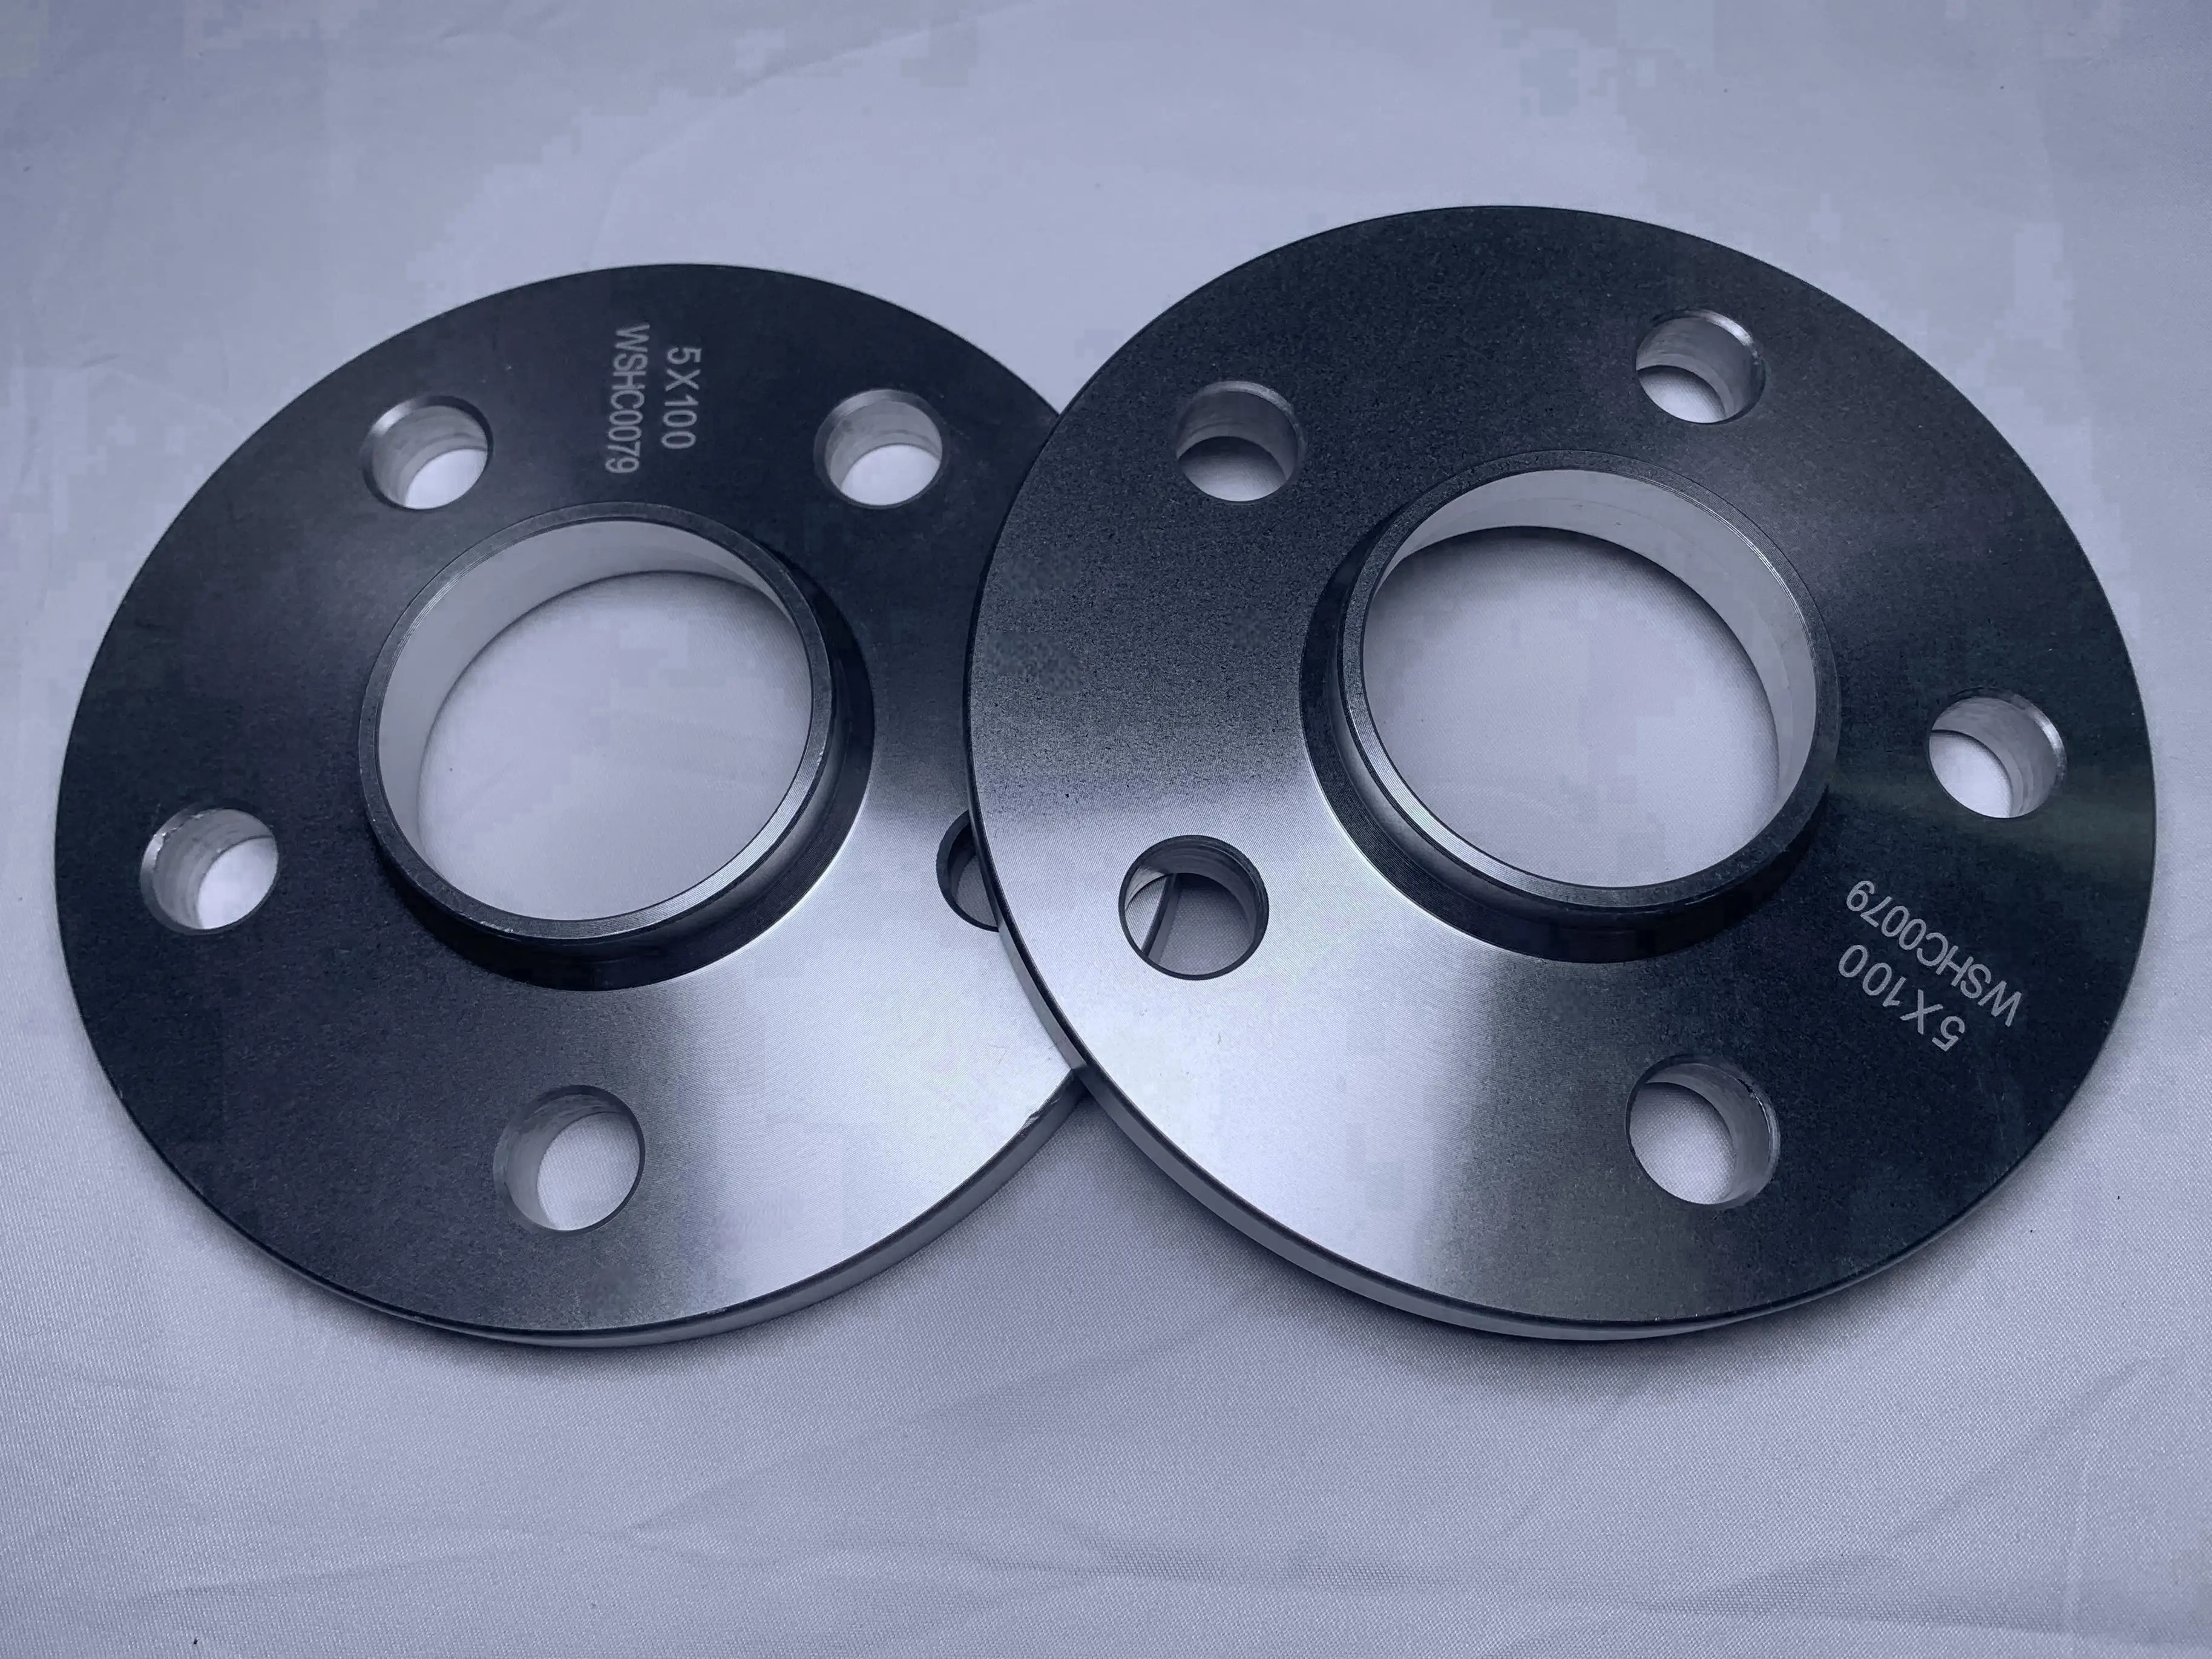 

2pcs 12mm Wheel Spacer Adapter PCD 5x114.3 Center Bore 70.5mm Suit for Hub Bearing Height Within 12mm